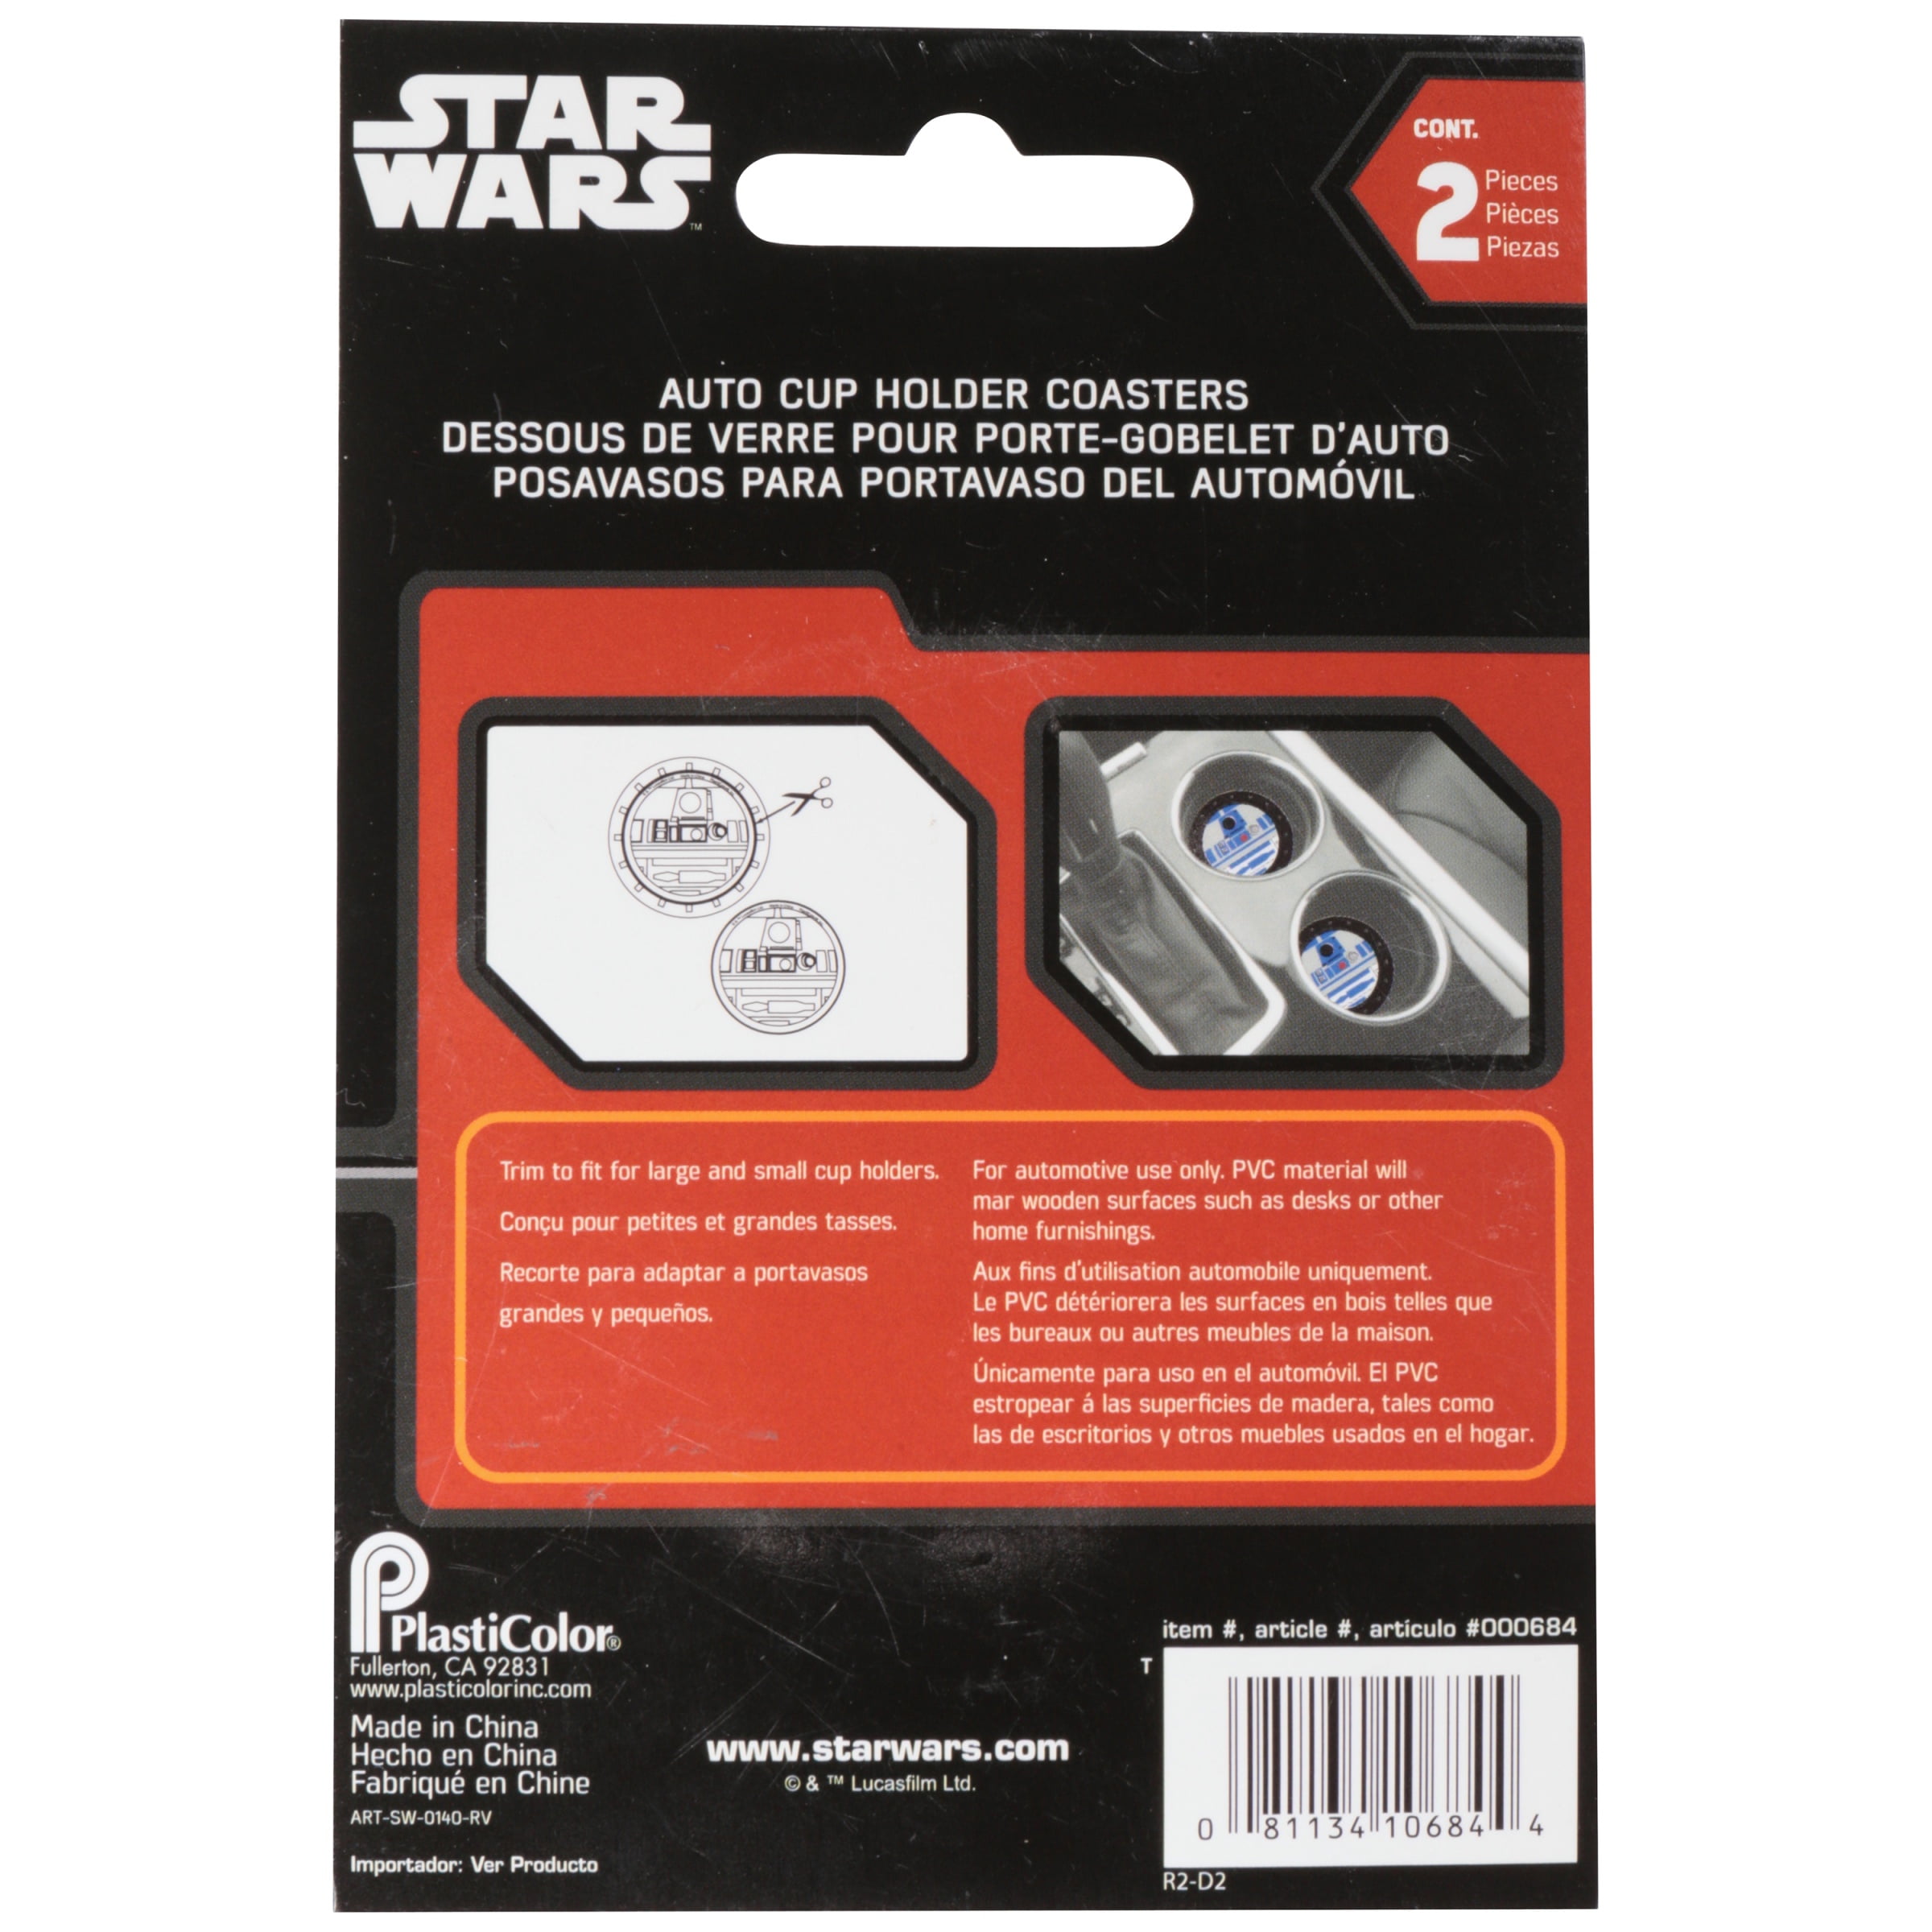  Plasticolor 000684R01 Star Wars R2D2 Auto Cup Holder Coaster  for Car Truck SUV 2-Pack : Home & Kitchen